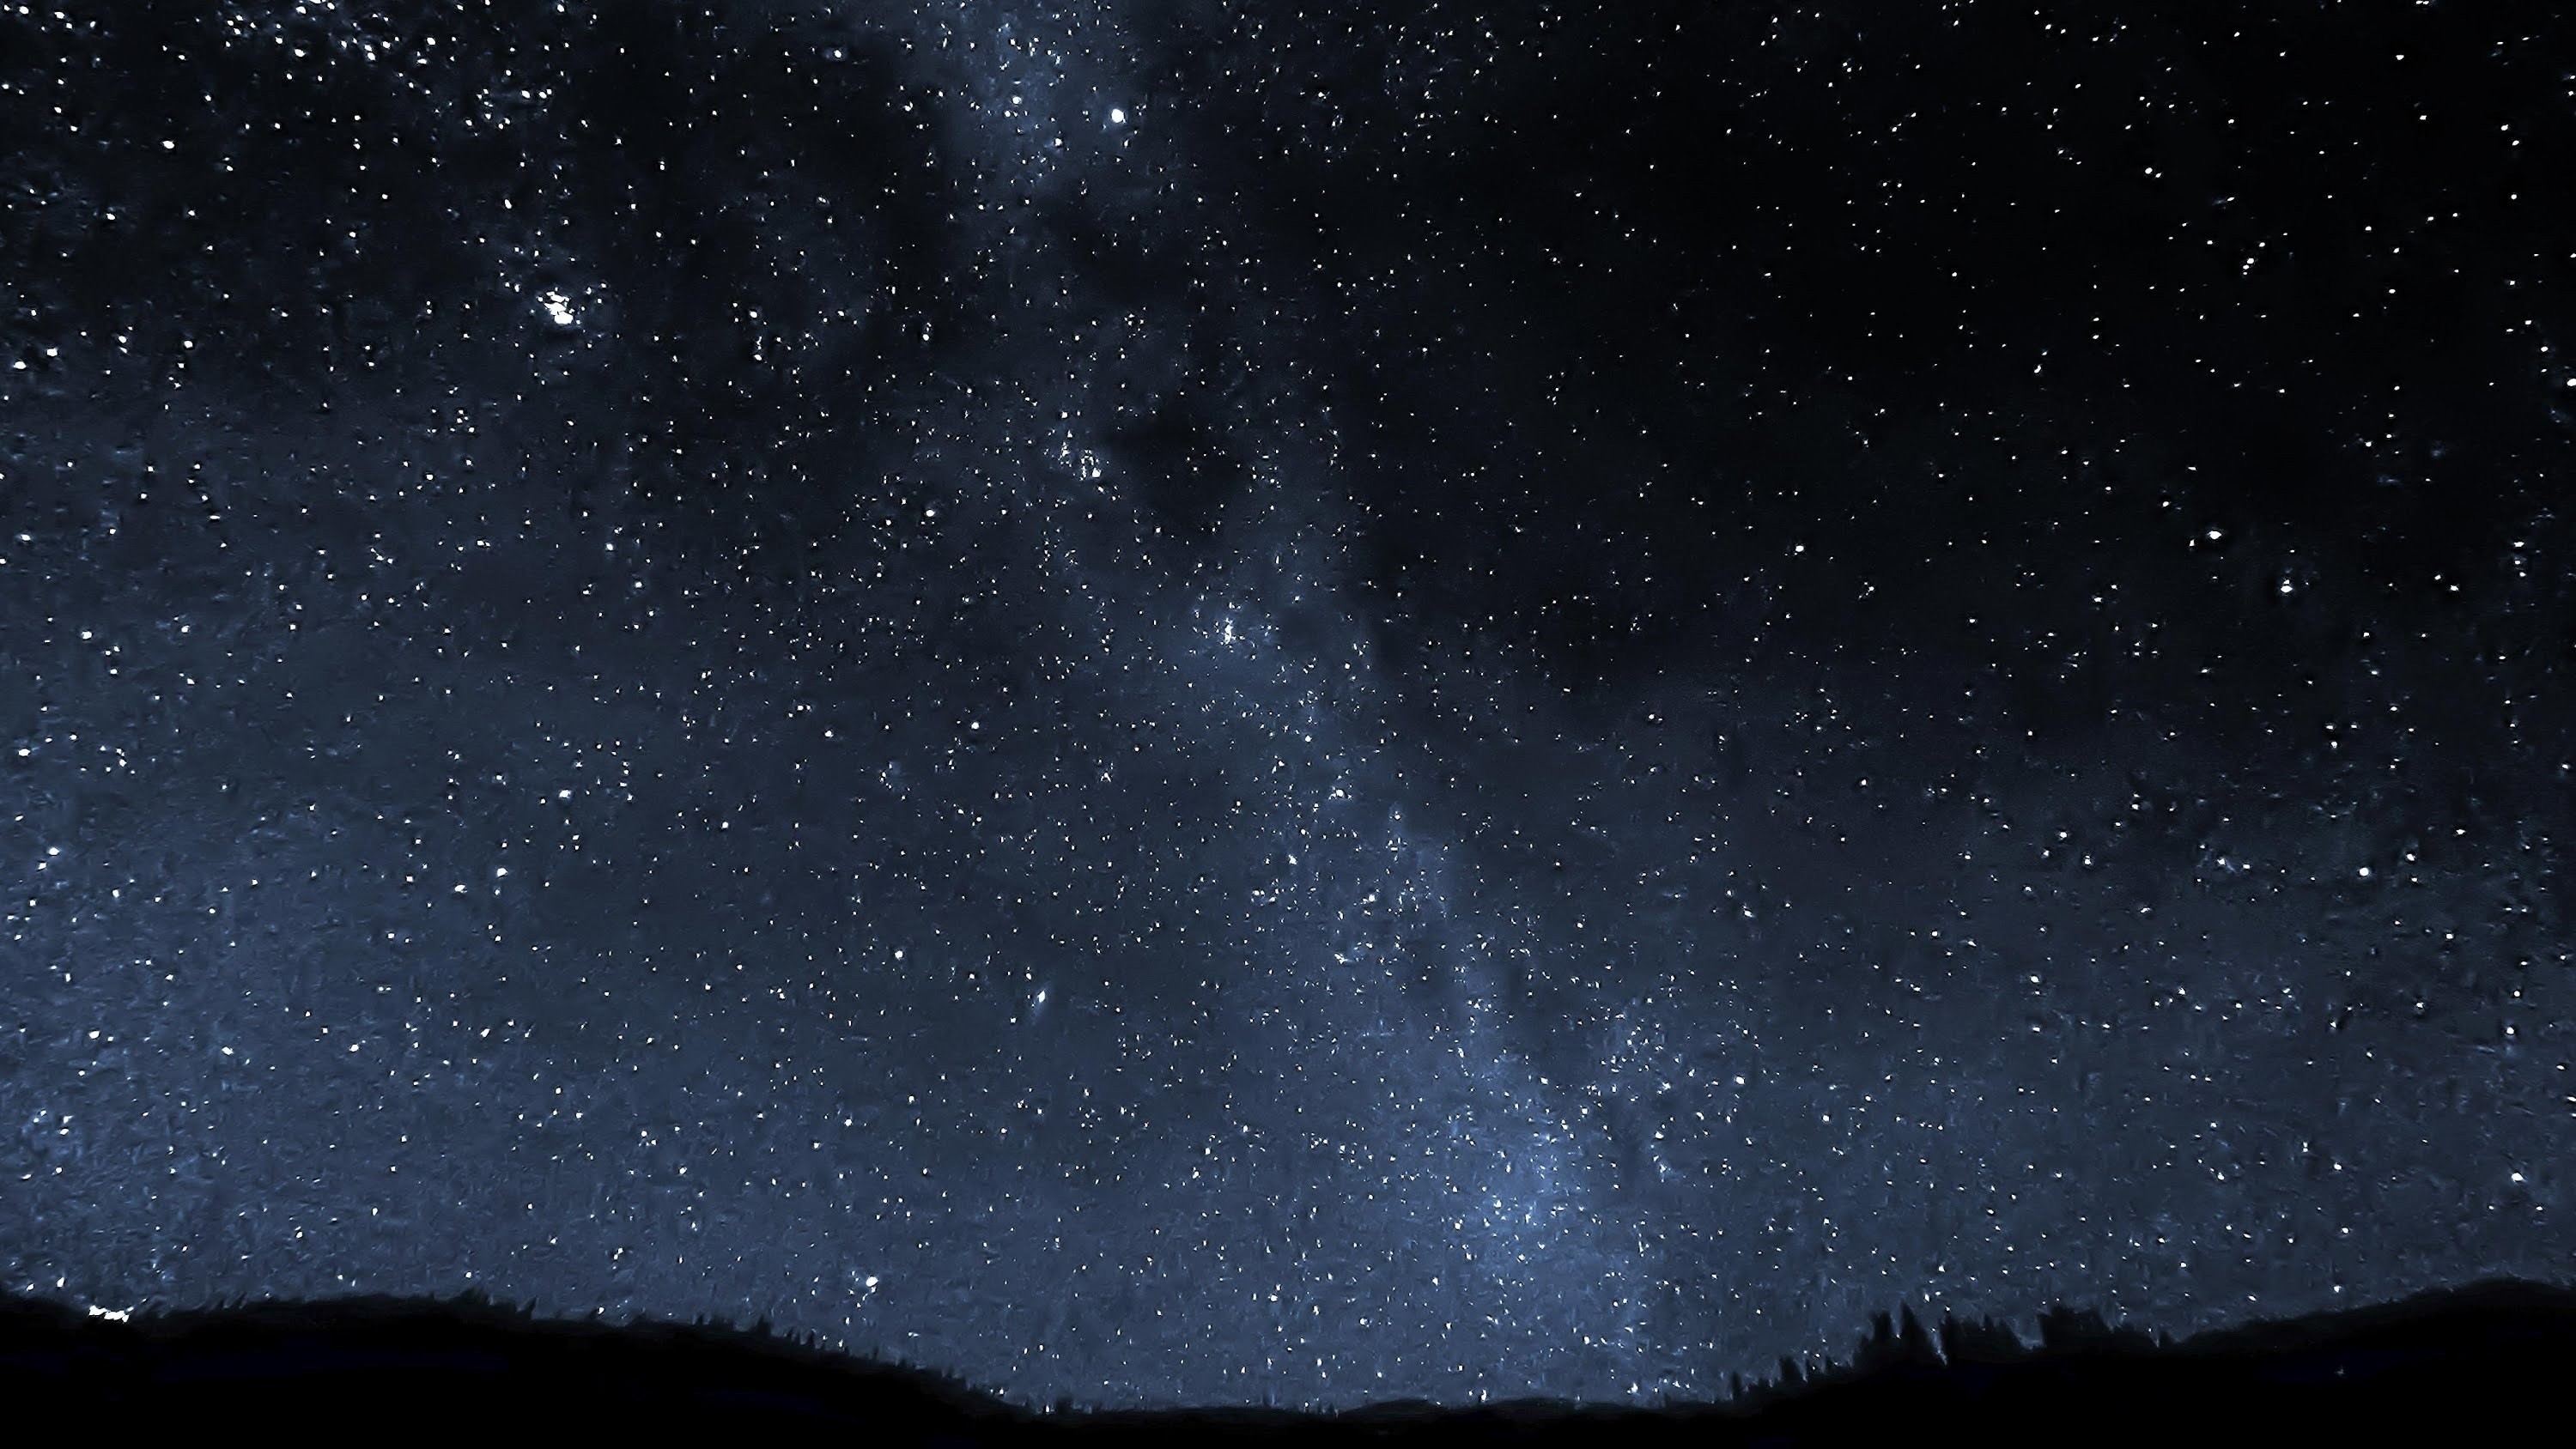 3000x1688 Title : night sky stars hd wallpapers and images – top wallpaper hd.  Dimension : 3000 x 1688. File Type : JPG/JPEG